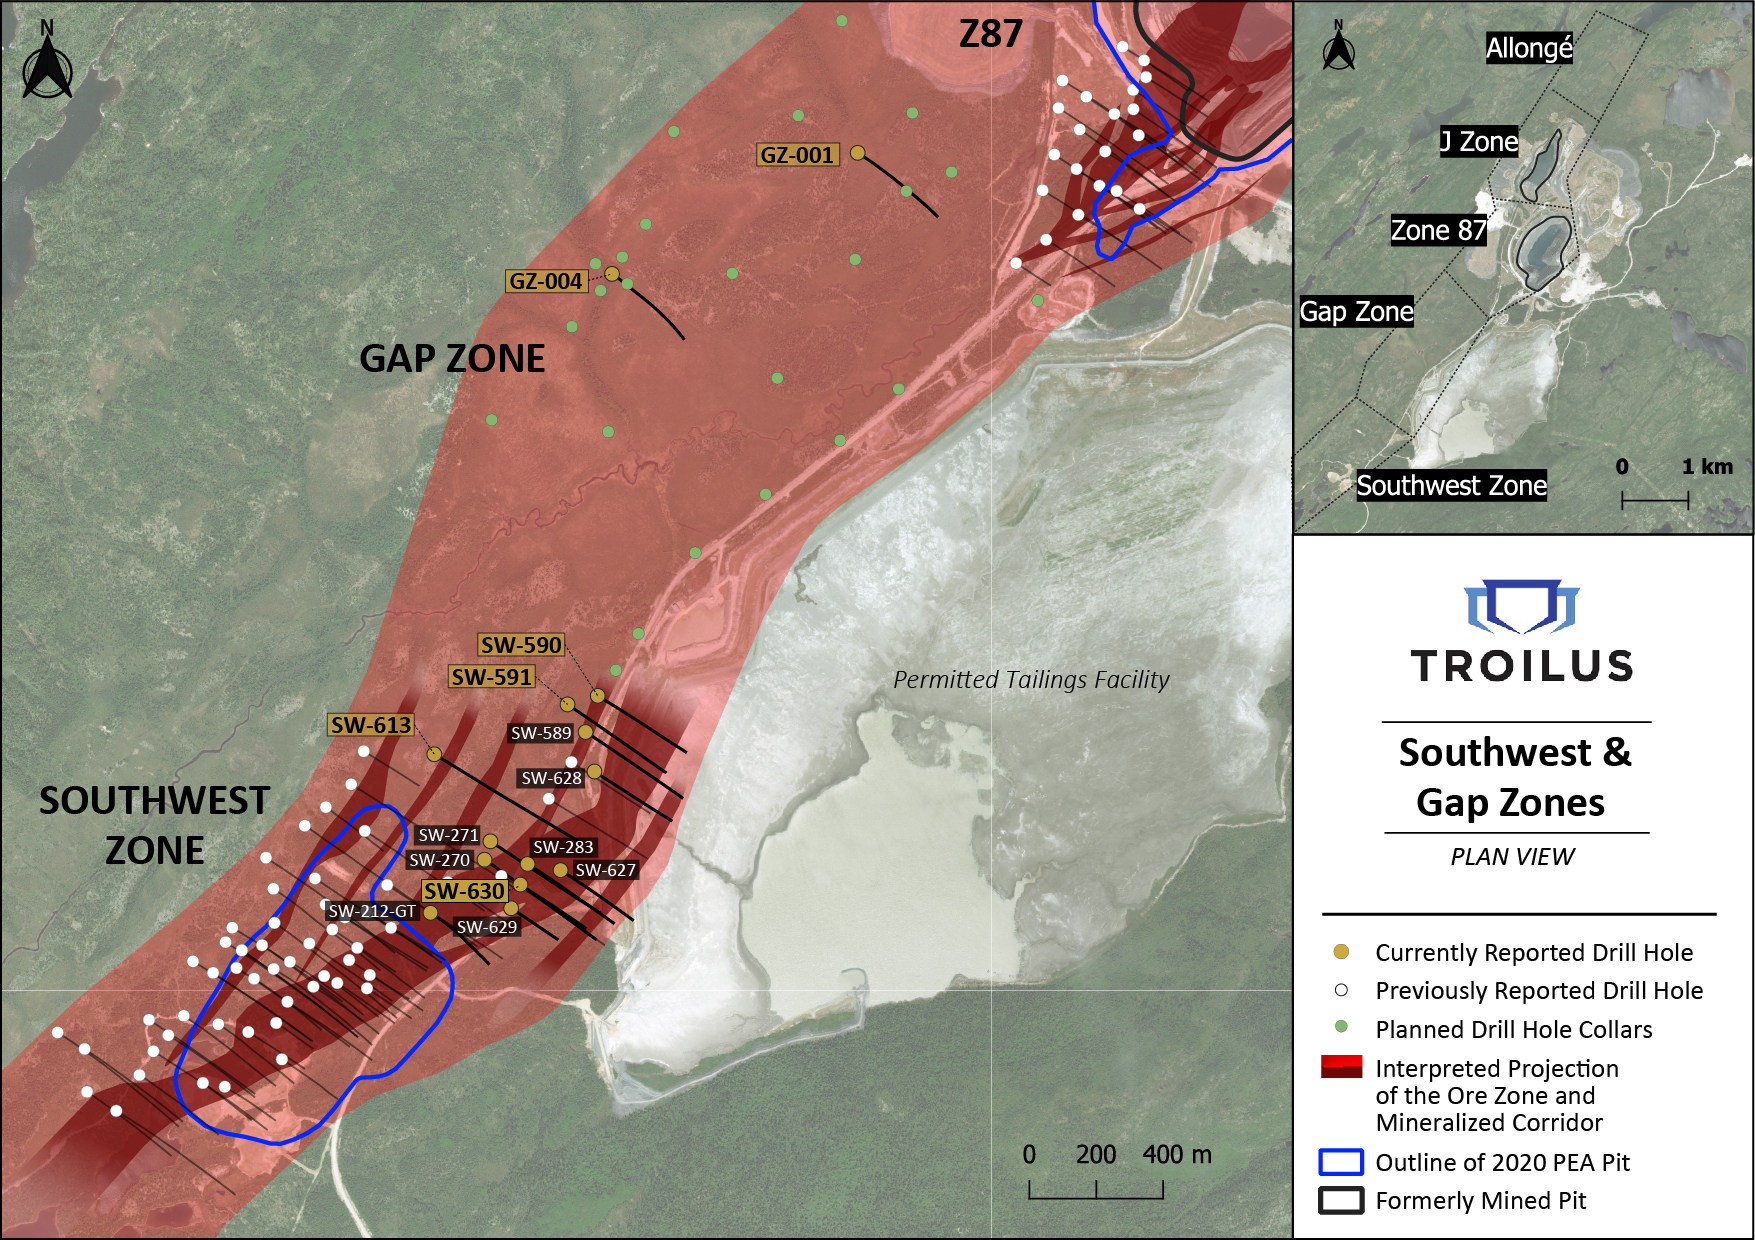 Figure 1: Plan View Map of Southwest, Gap and Z87 Zones Showing Current and Previously Reported Drilling